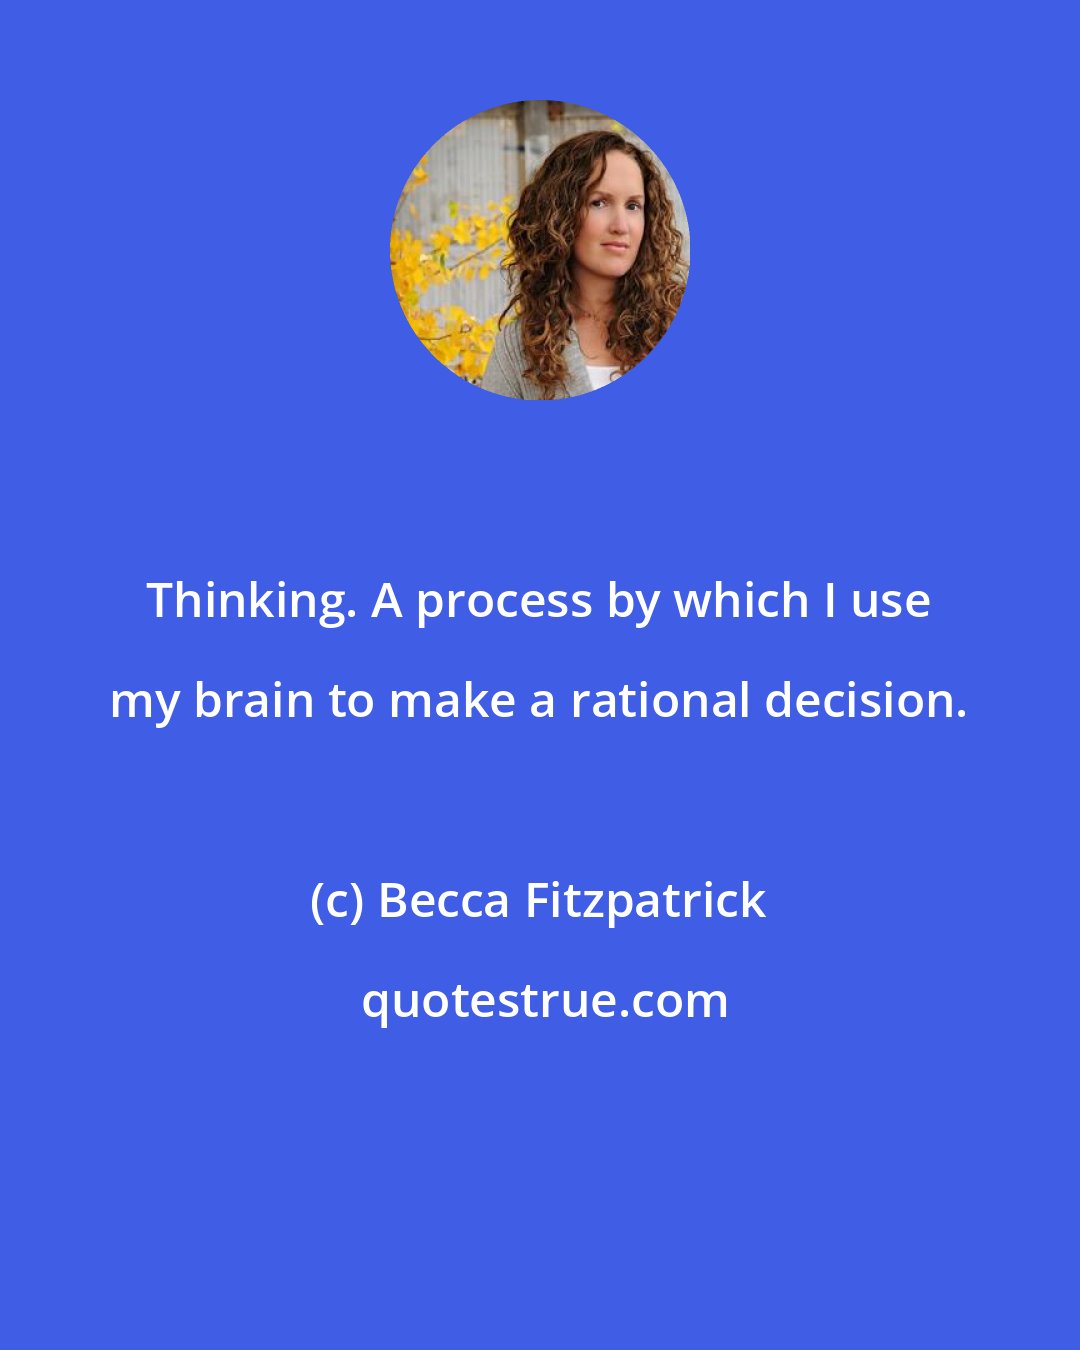 Becca Fitzpatrick: Thinking. A process by which I use my brain to make a rational decision.